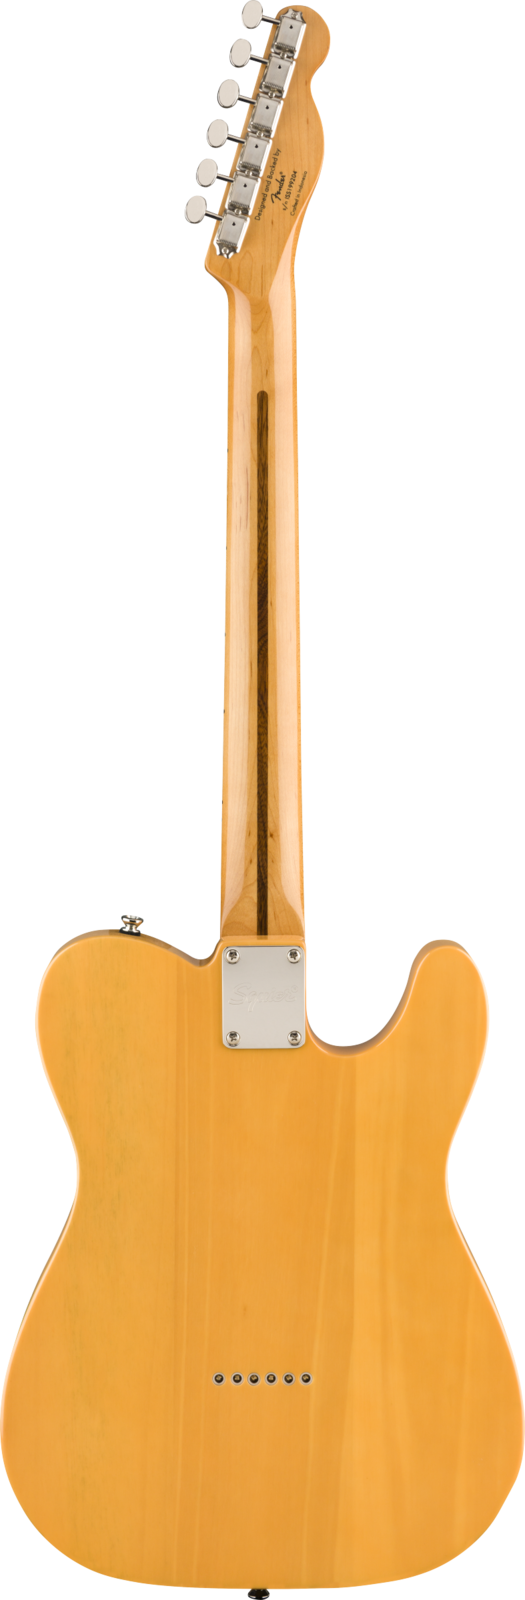 Squier Classic Vibe '50s Telecaster Left-Handed Butterscotch Blonde